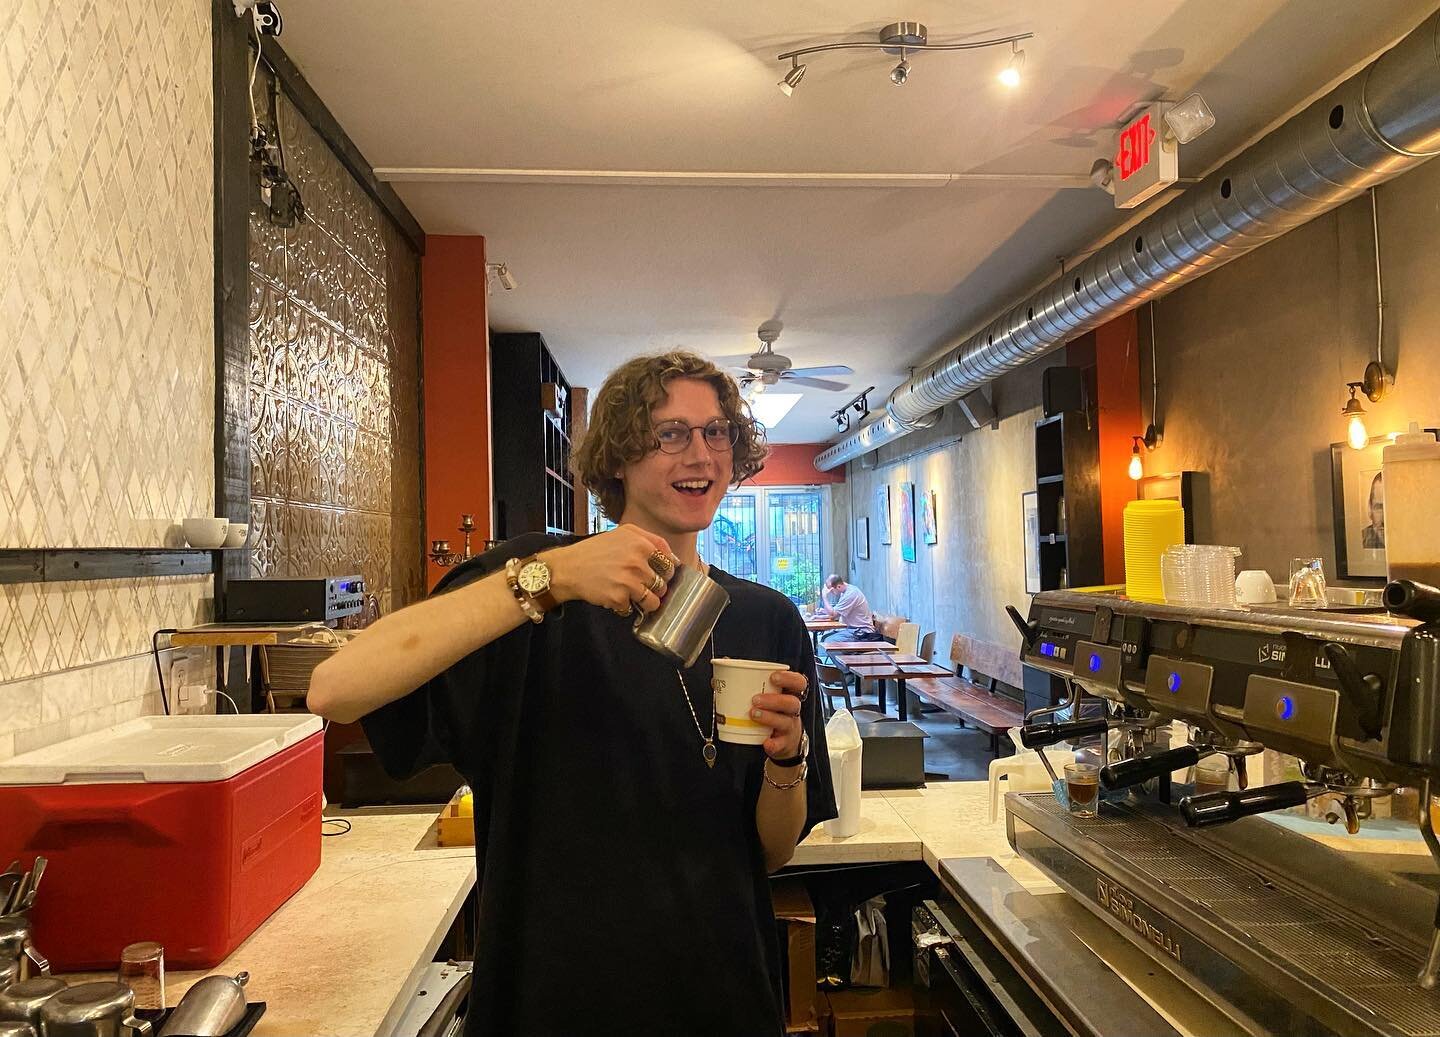 Cameron says &ldquo;Coffee tastes better on the weekends!&rdquo;
Be like Cameron and come visit one of our Jimmy&rsquo;s locations - open all weekend long! 💛☕️
#longweekend #weekendvibes #coffeeshop #may #kensingtonmarket #kensington #coffee #toront